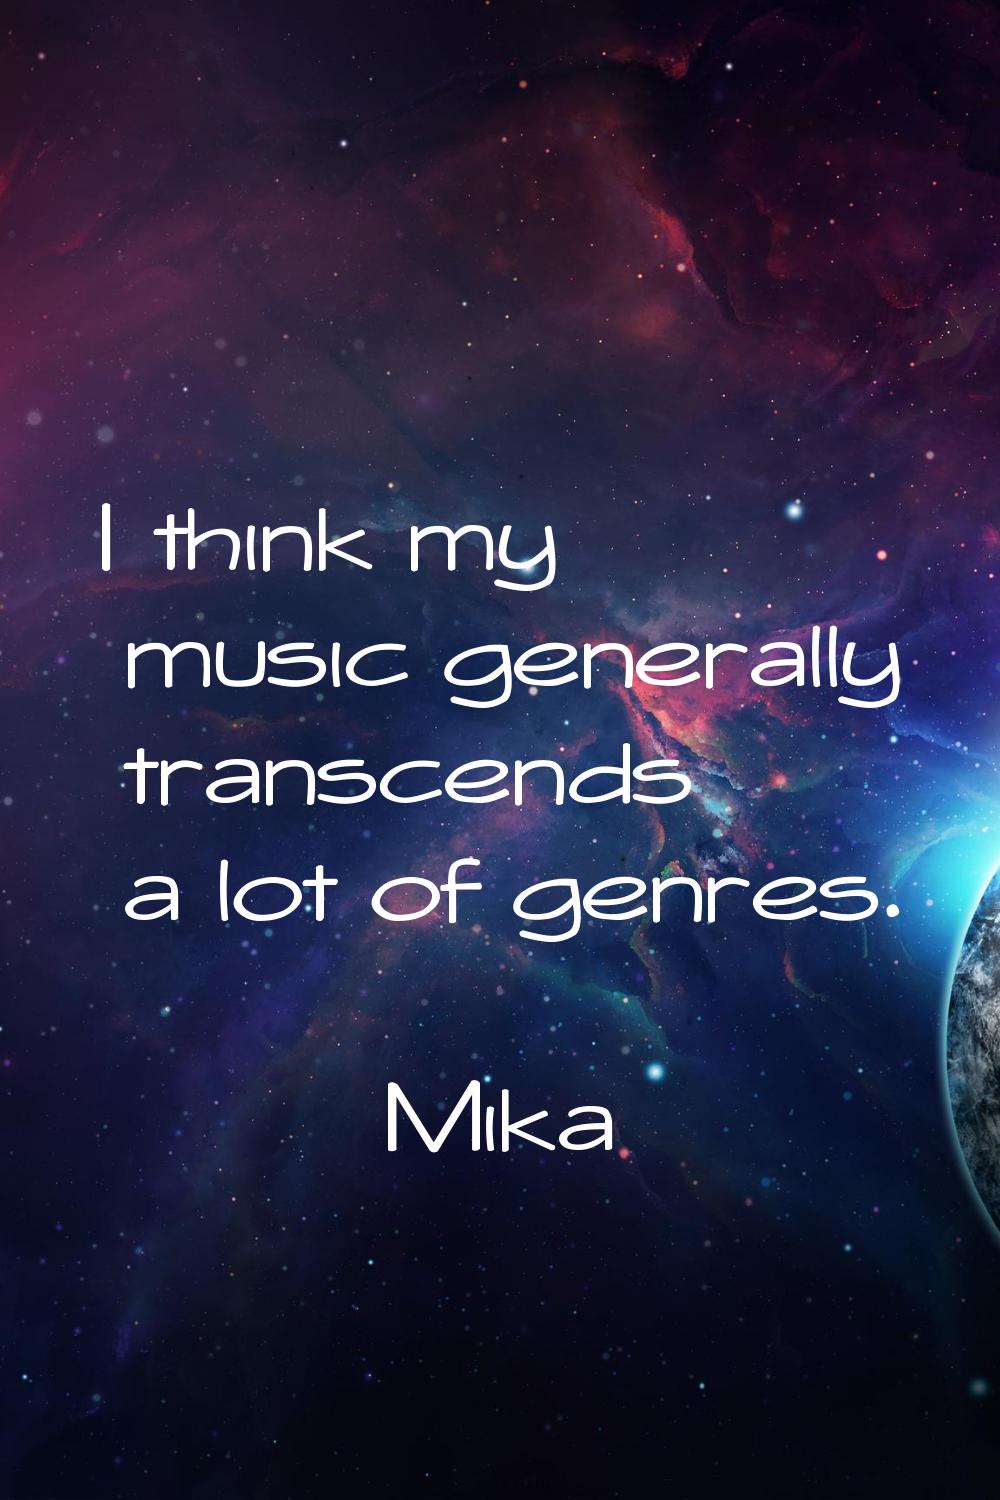 I think my music generally transcends a lot of genres.